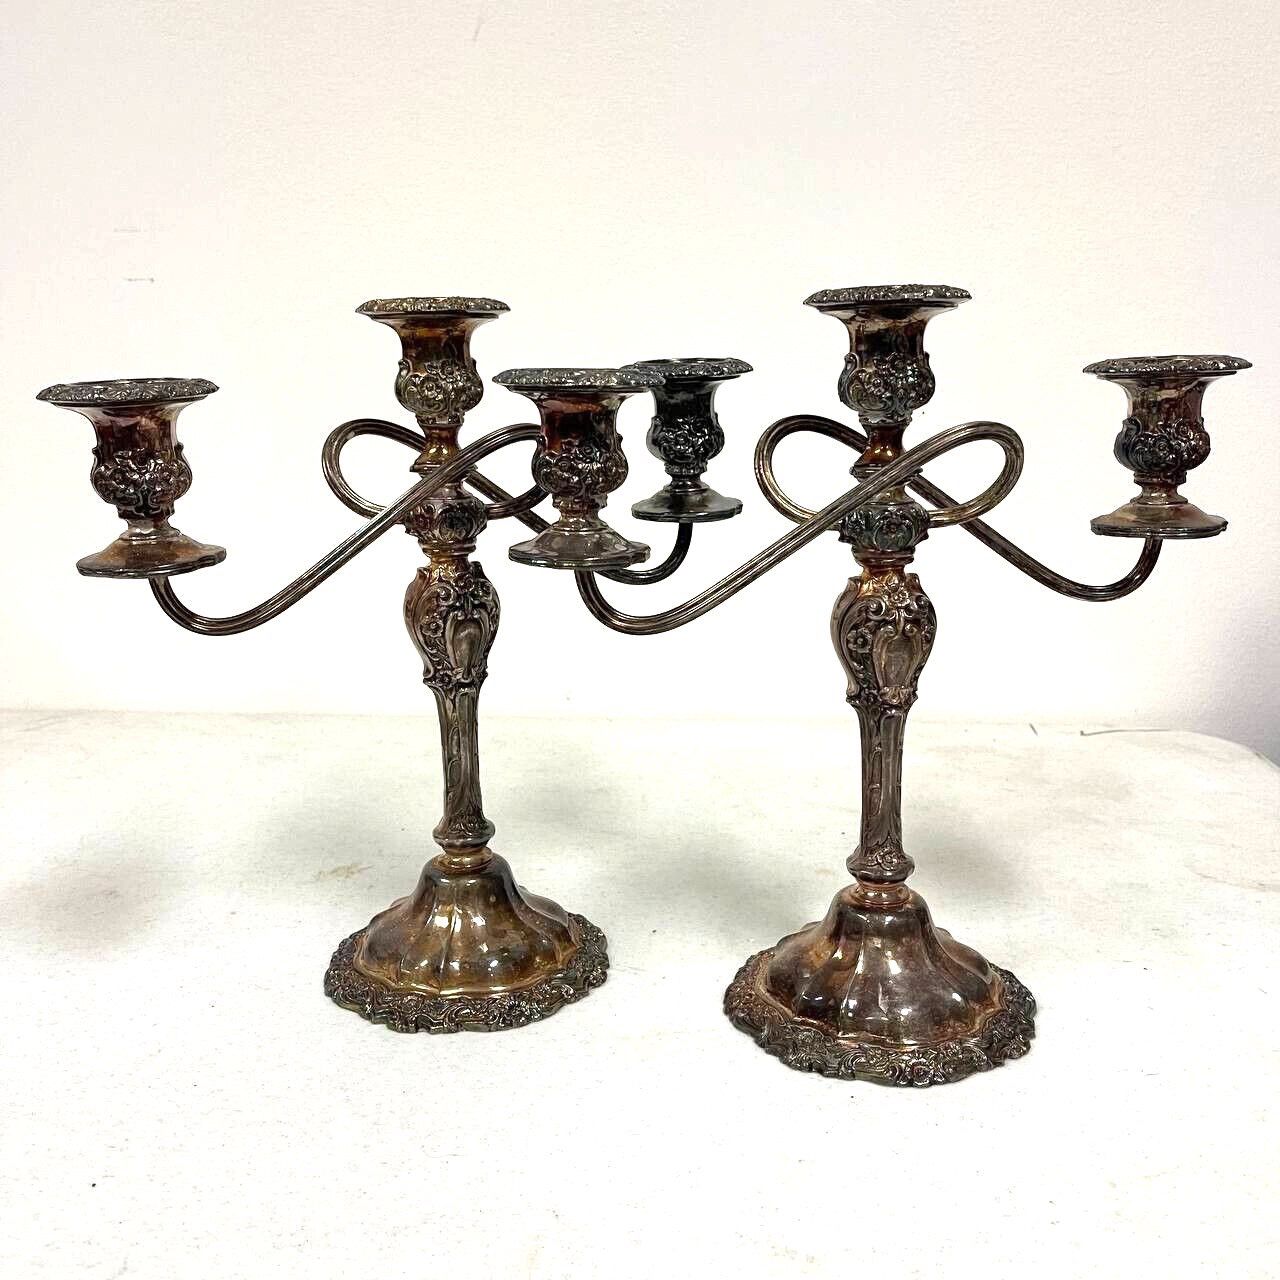 Candelabra Candle Twisted Arm, Ornate Silver Antiqued Patina, 3 Candle, Set of 2